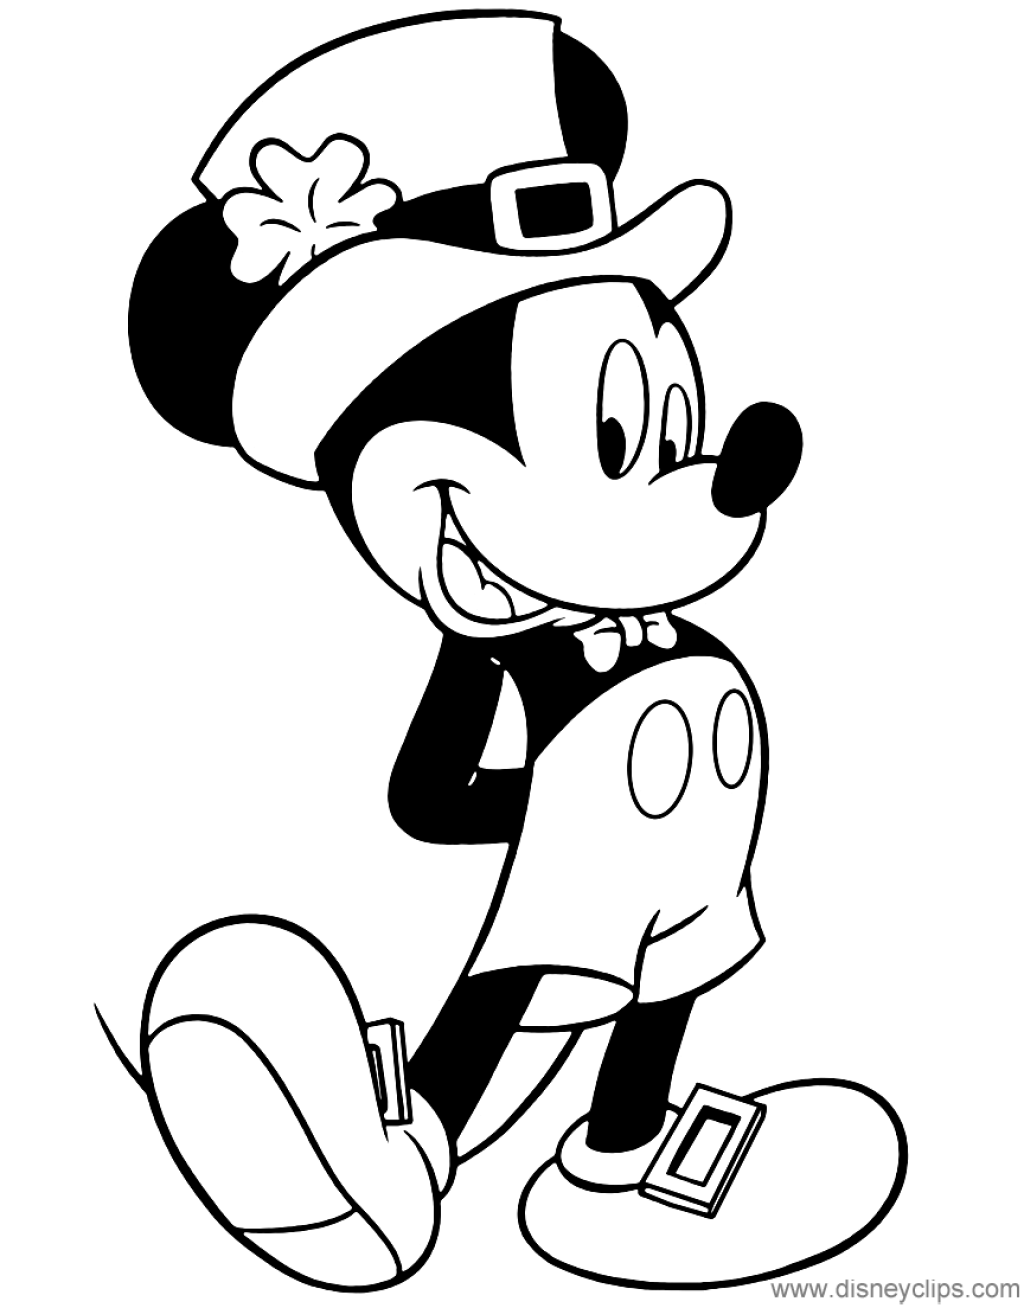 Picture of: Mickey Mouse dressed up for St-Patrick’s Day coloring page